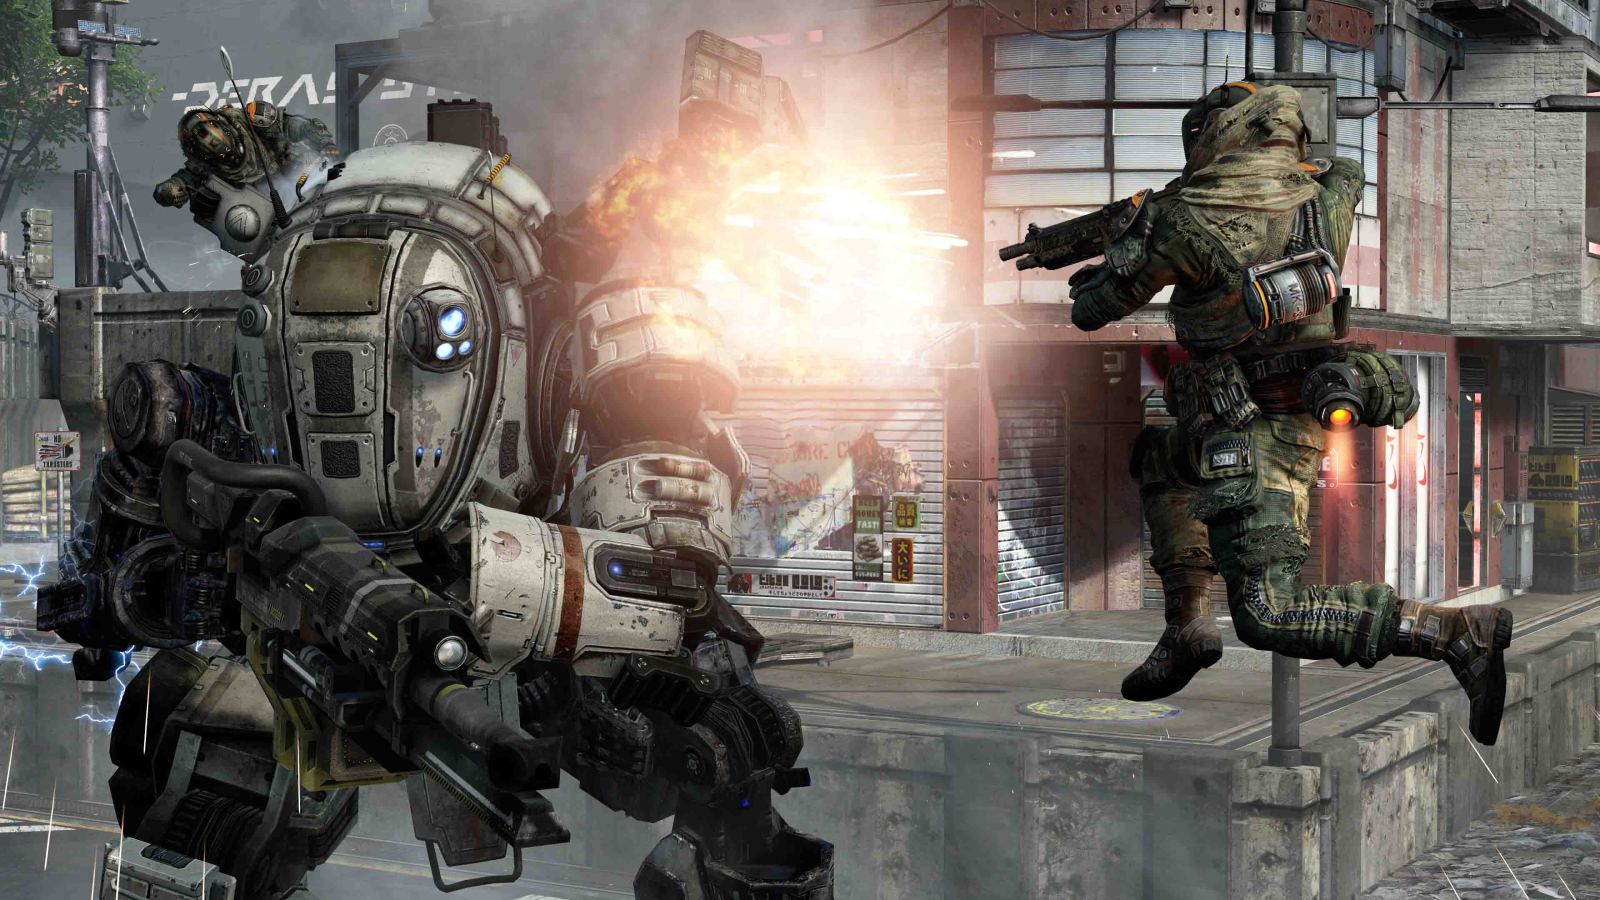 Titanfall-2-is-expected-to-garner-overwhelming-response-from-the-gaming-community